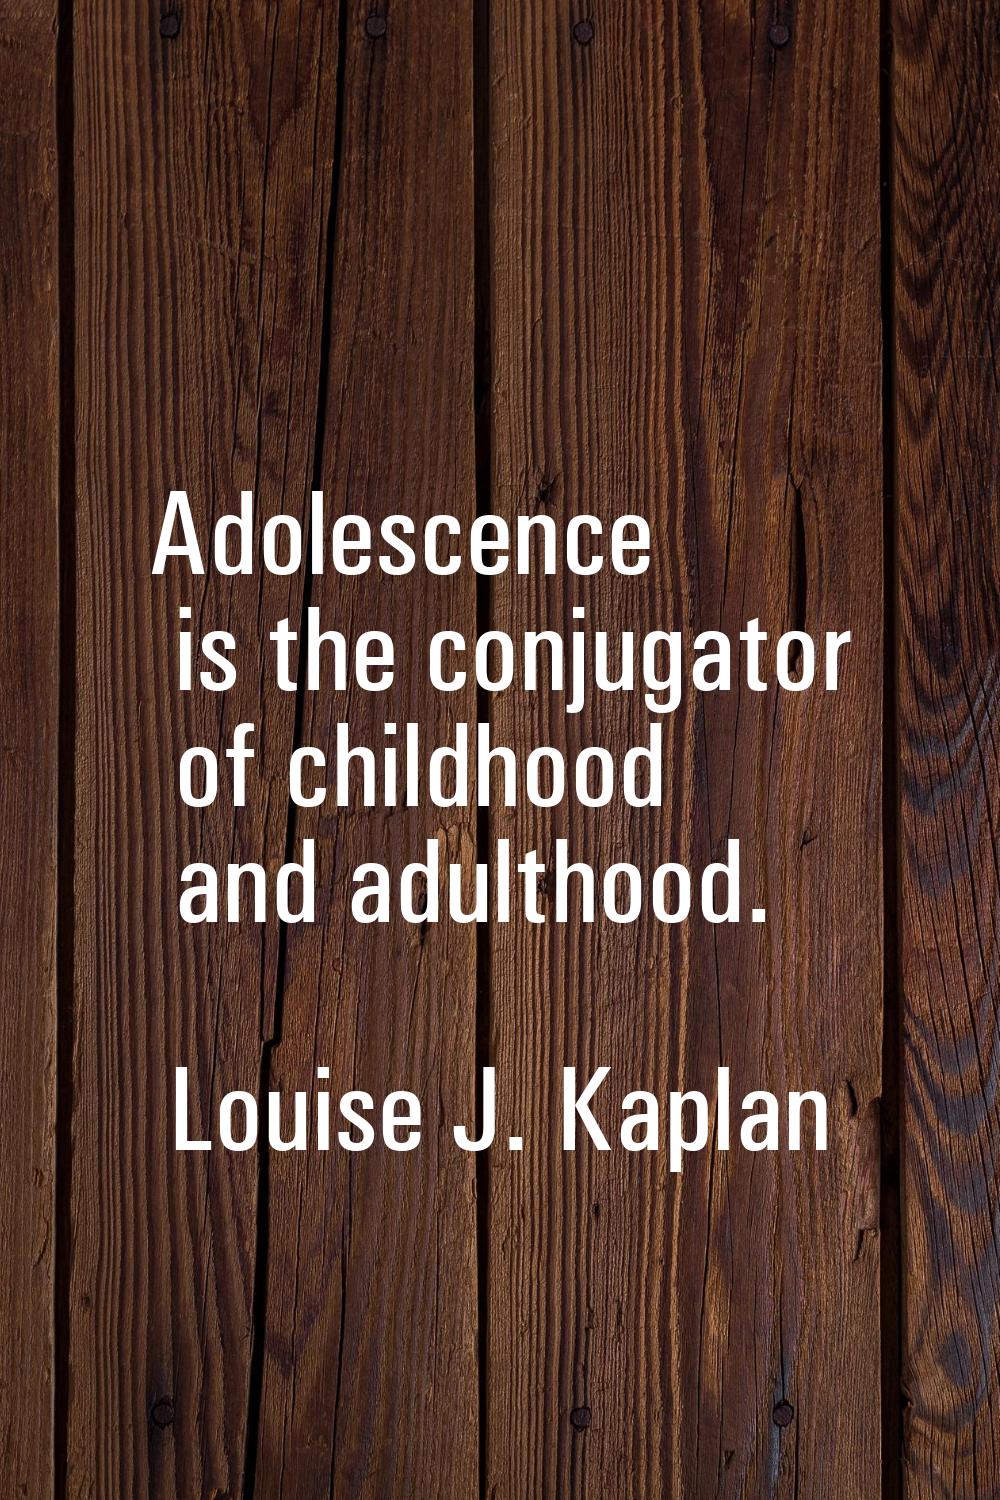 Adolescence is the conjugator of childhood and adulthood.